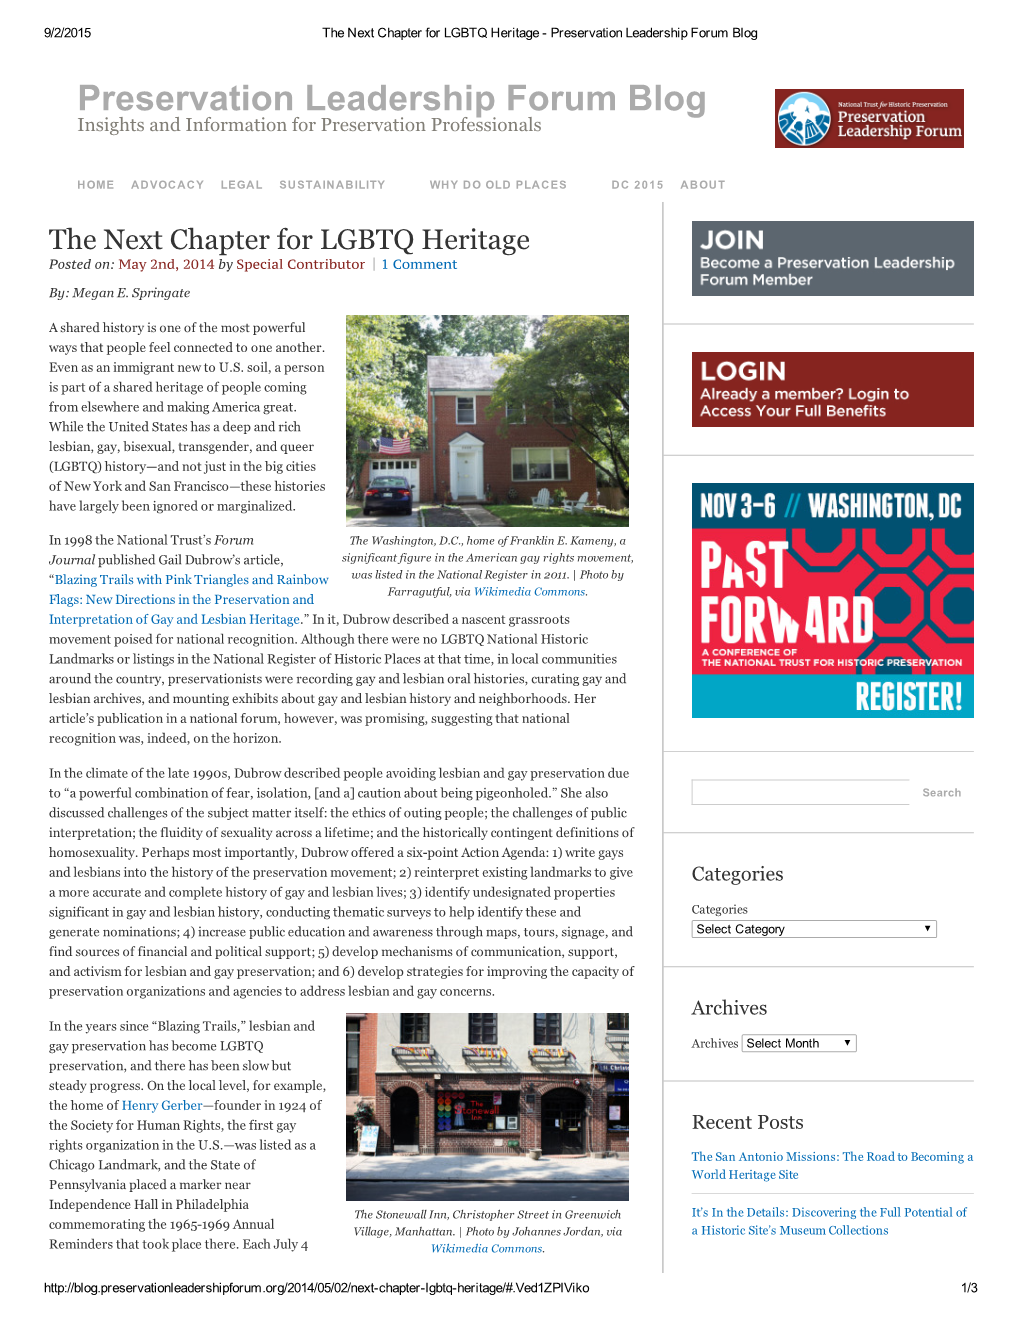 "The Next Chapter for LGBTQ Heritage," Preservation Leadership